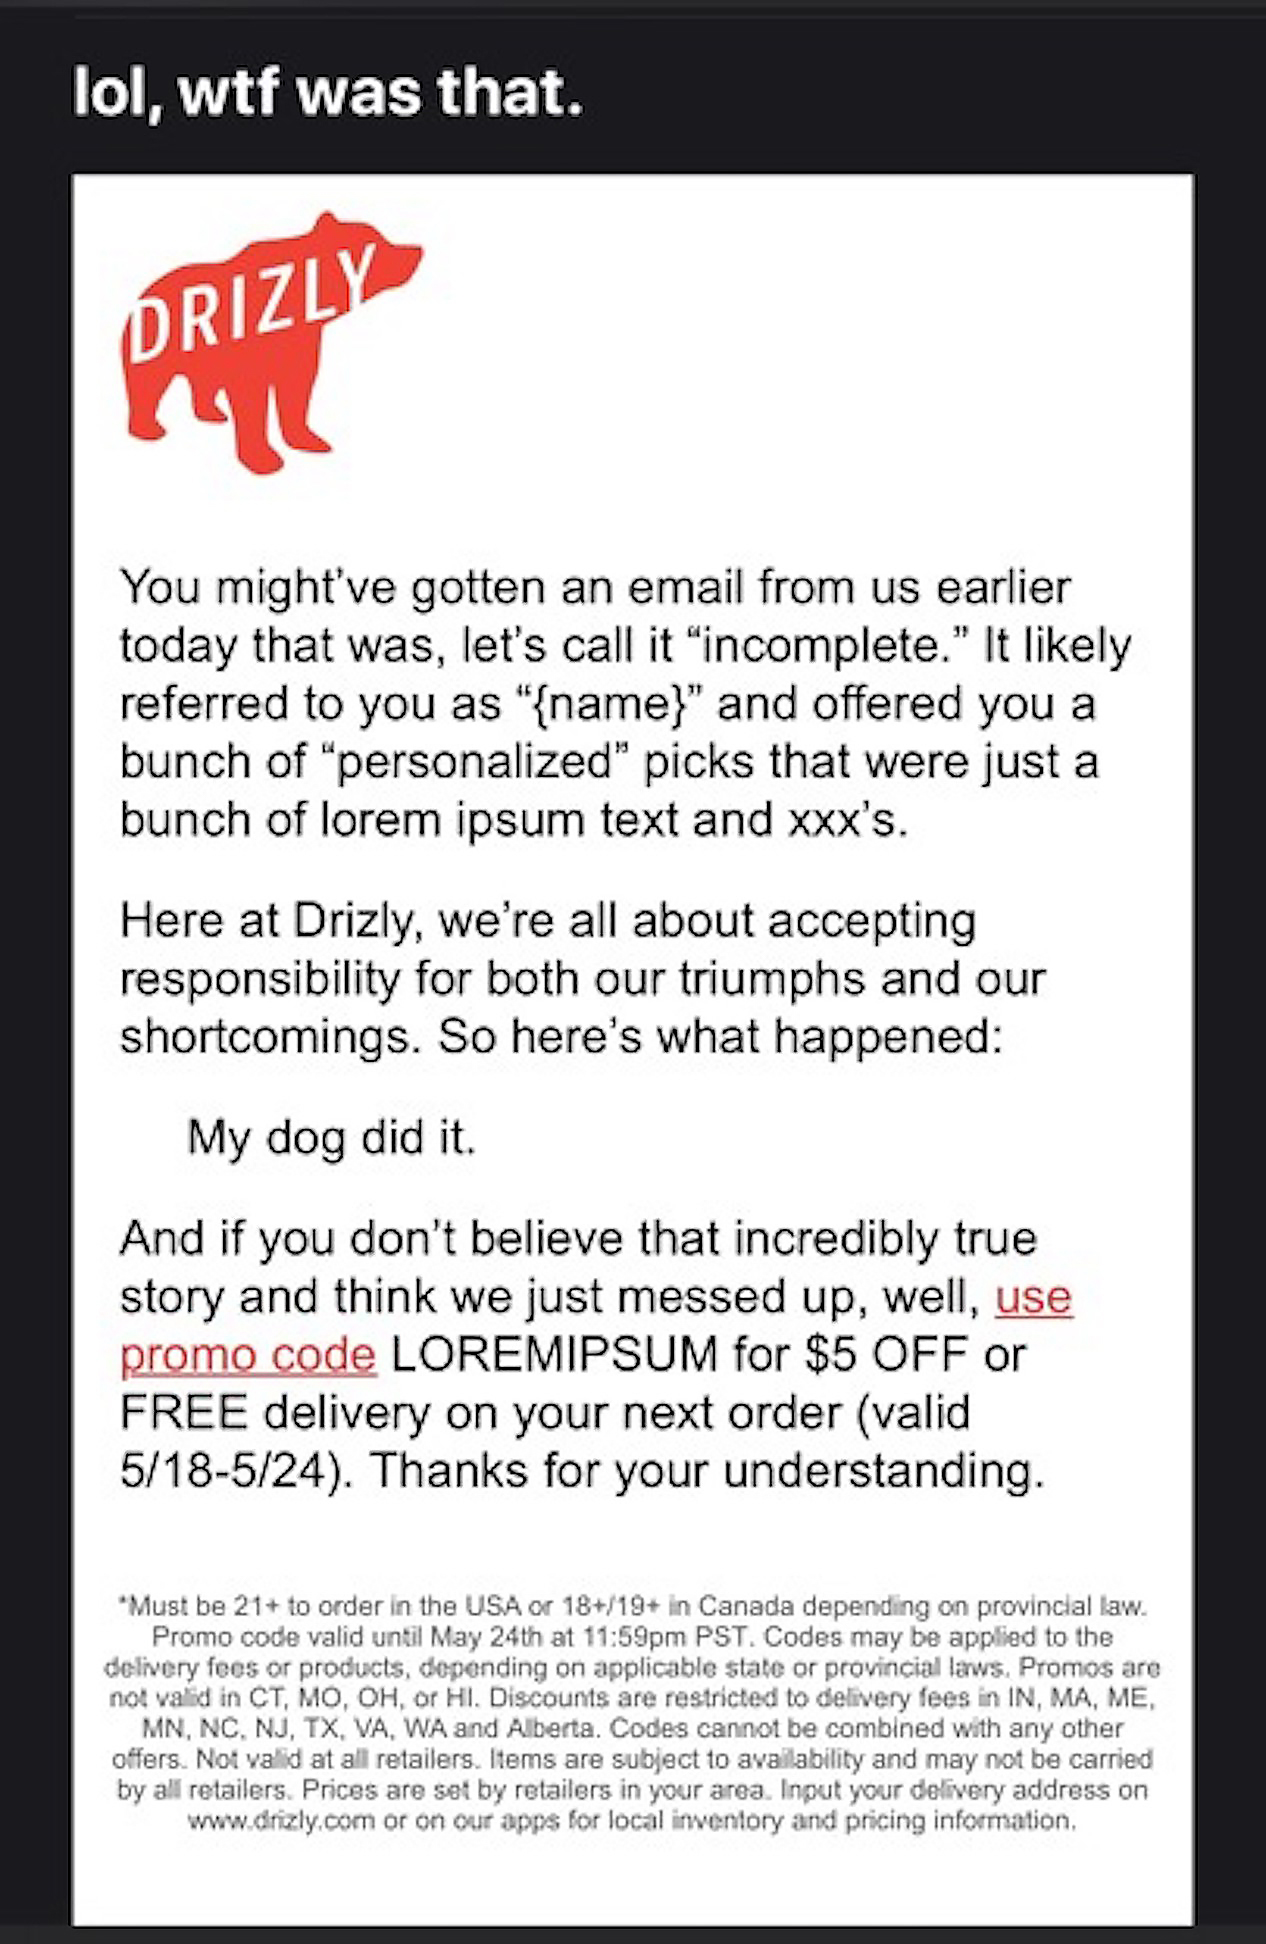 Drizly response email to error